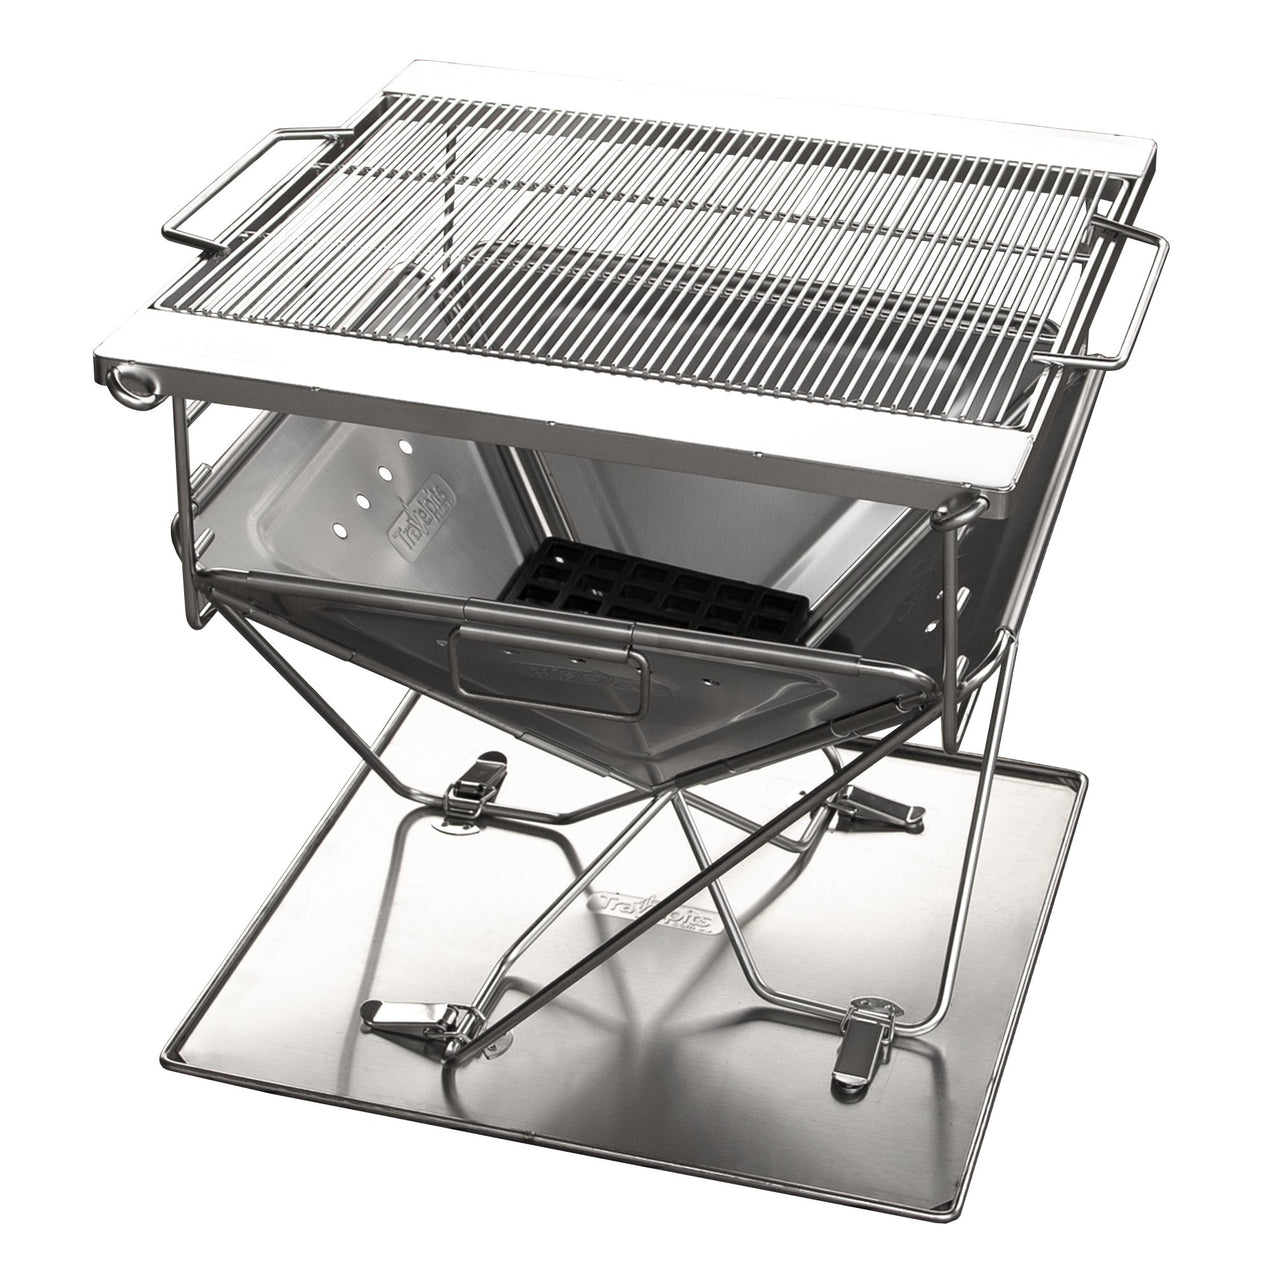 quokka fire pit, camping fire, portable fire pit